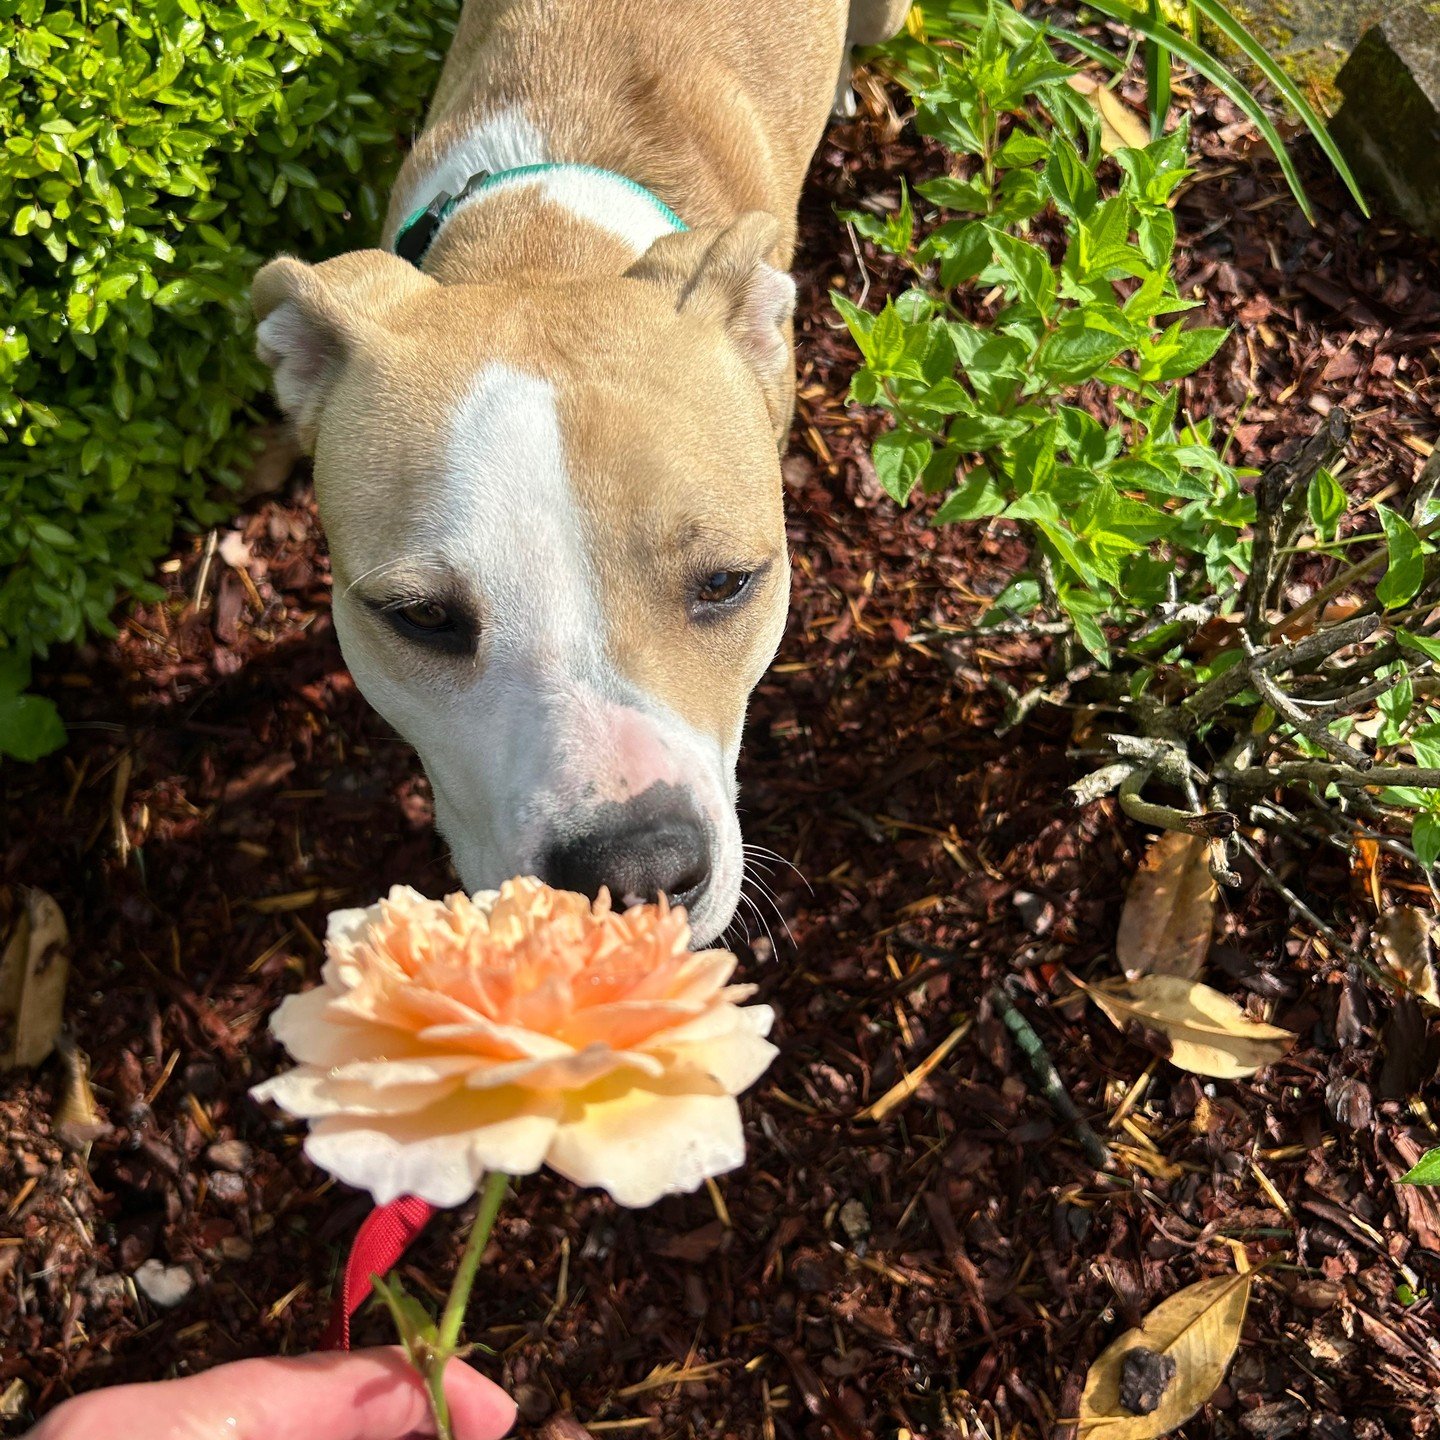 Pop Tart getting a whiff of the first rose of spring...it must have smelled delicious to her since she then tried to eat it. Also, if you are in the Nashville area on 5/23, I will be reading at the venerable Poet's Corner at Scaritt Bennett Center al